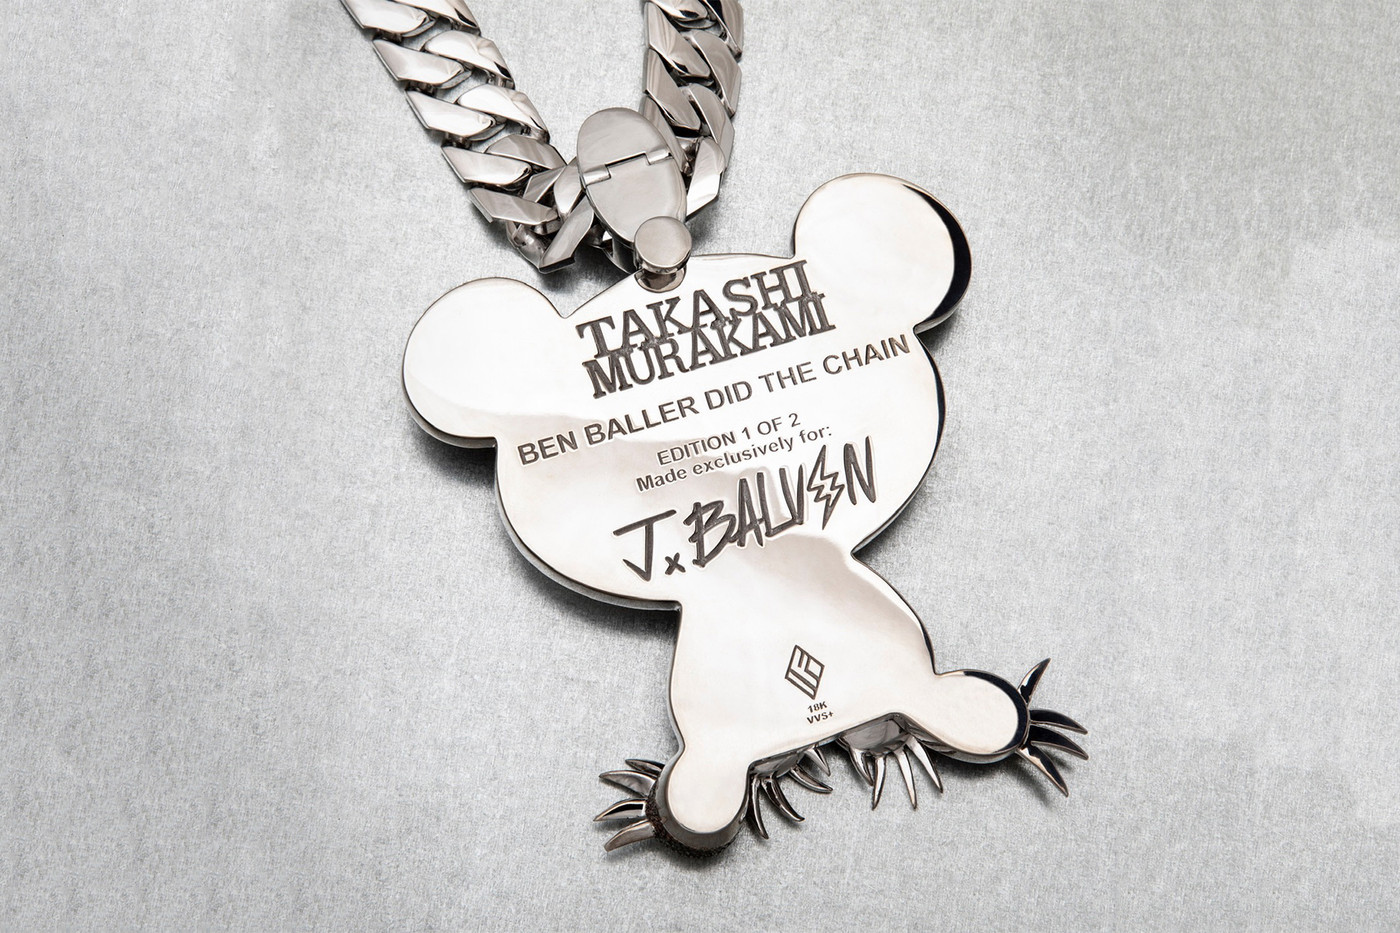 Ben Baller and Takashi Murakami Team Up to Produce Two $560,000 Pieces of Jewellery for J Balvin